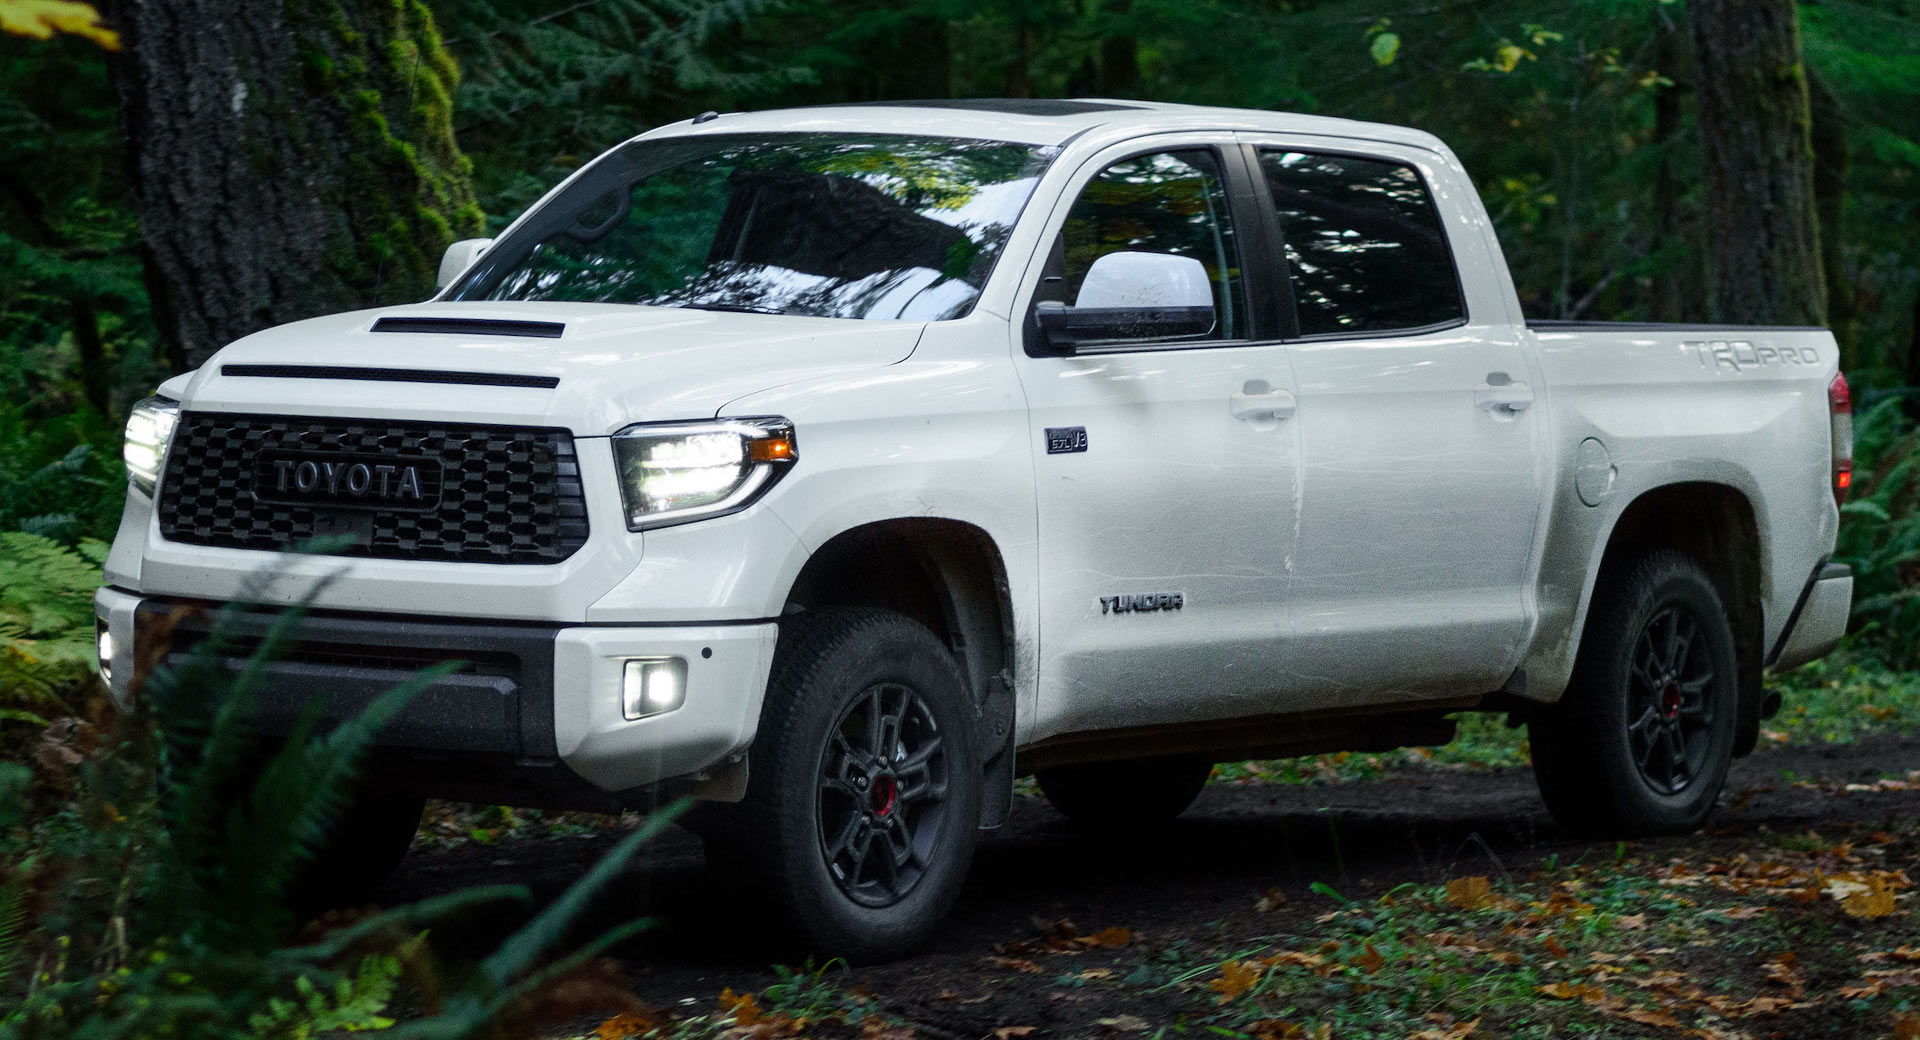 460 Popular 03 toyota tundra for Collection